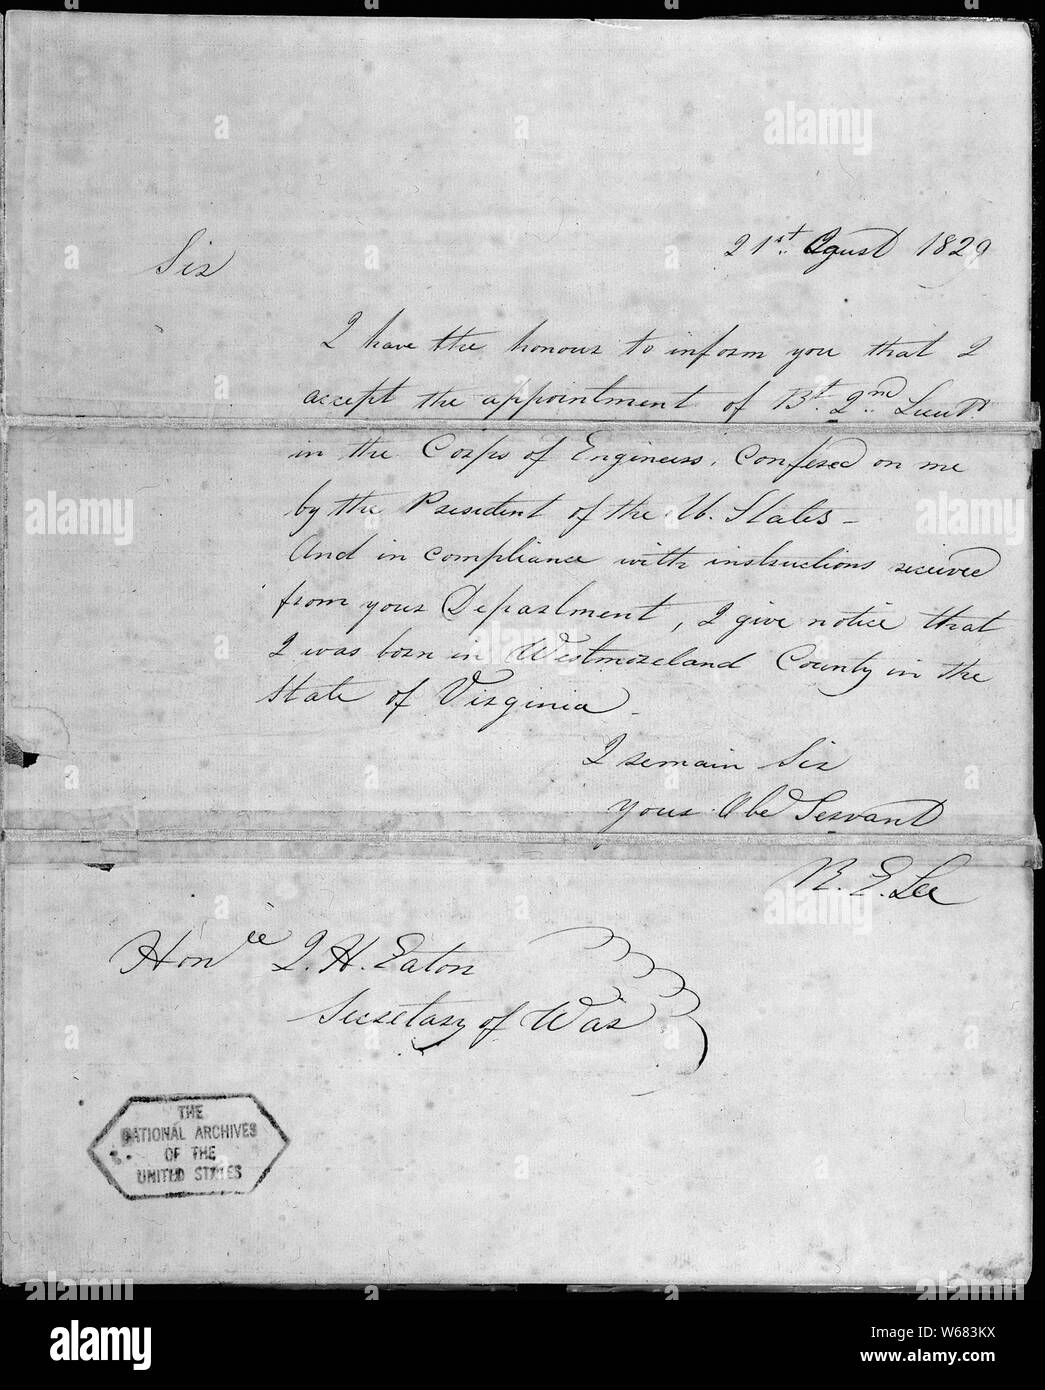 Robert E. Lee's Acceptance of the Appointment of Brevet 2nd Lieutenant in the Army Corps of Engineers; Scope and content:  Robert E. Lee began his military career in the U.S. Army. With this document, Lee accepted his first military commission upon graduation from the U.S. Military Academy at West Point in 1829. General notes:  Exhibit History: American Originals, December 1995 - June 1996, National Archives Rotunda, Washington, DC, Exhibit No. 624.0019. Stock Photo